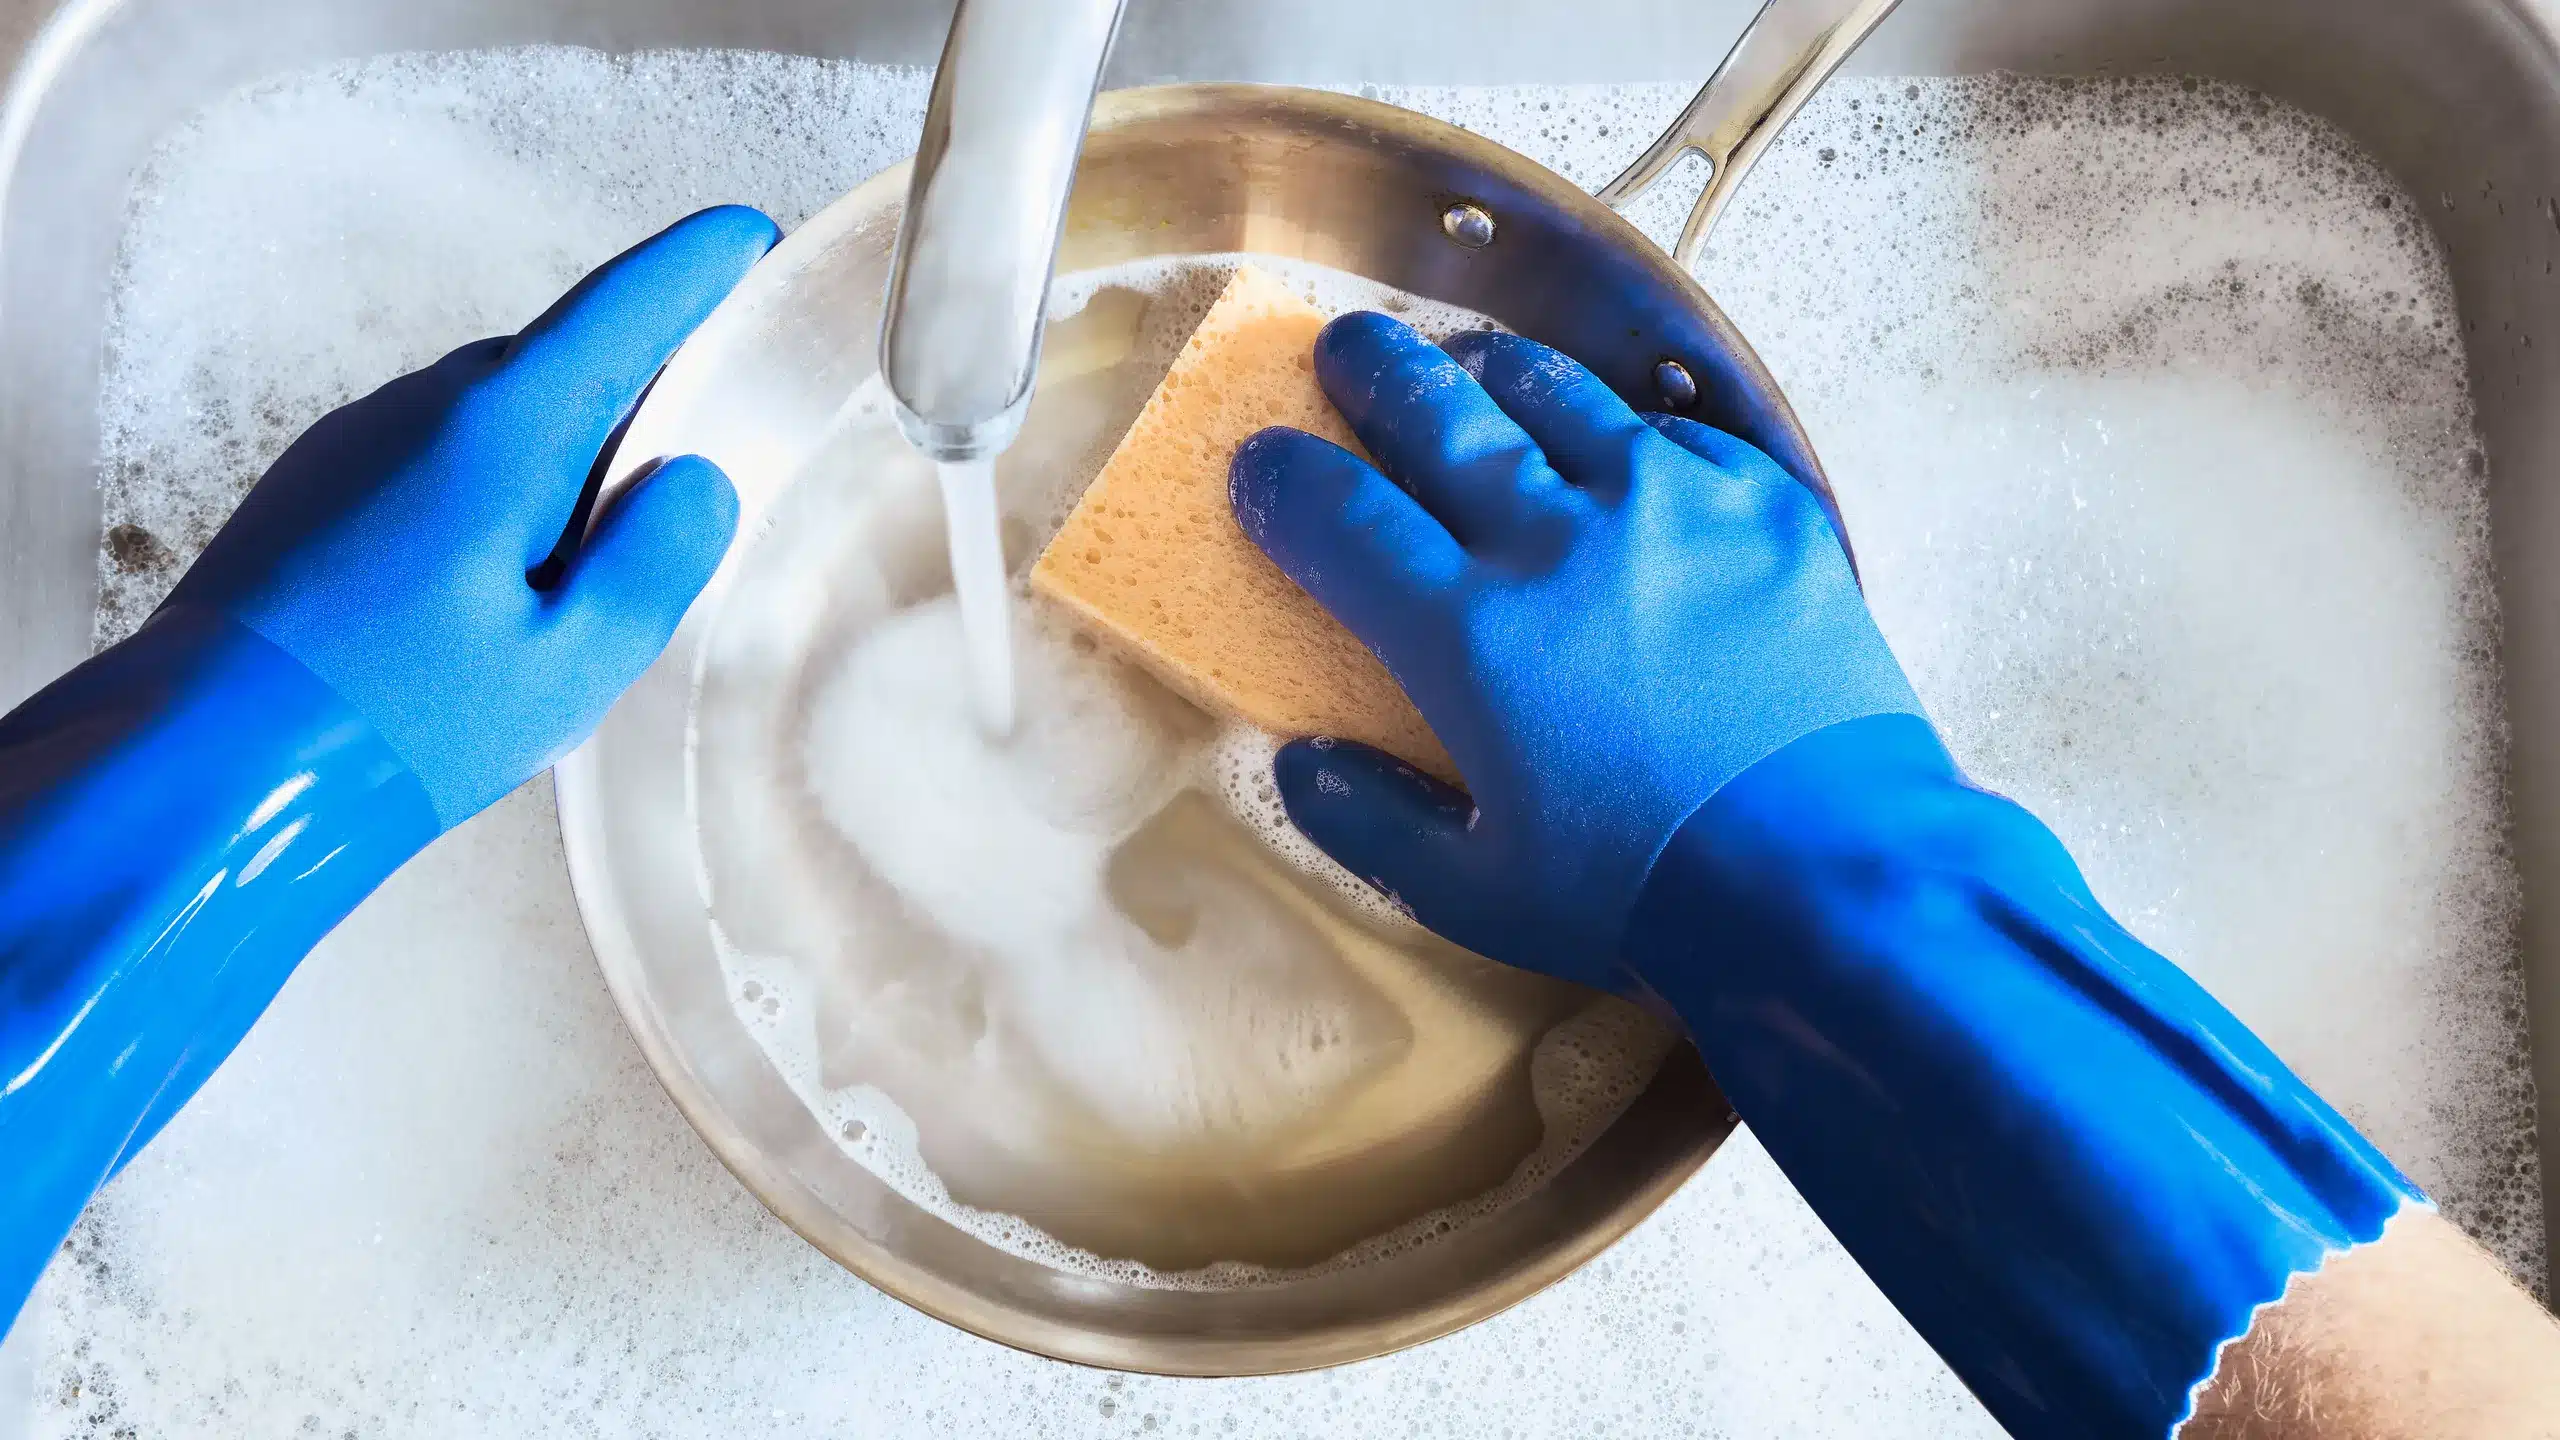 rubber gloves cleaning<br />
